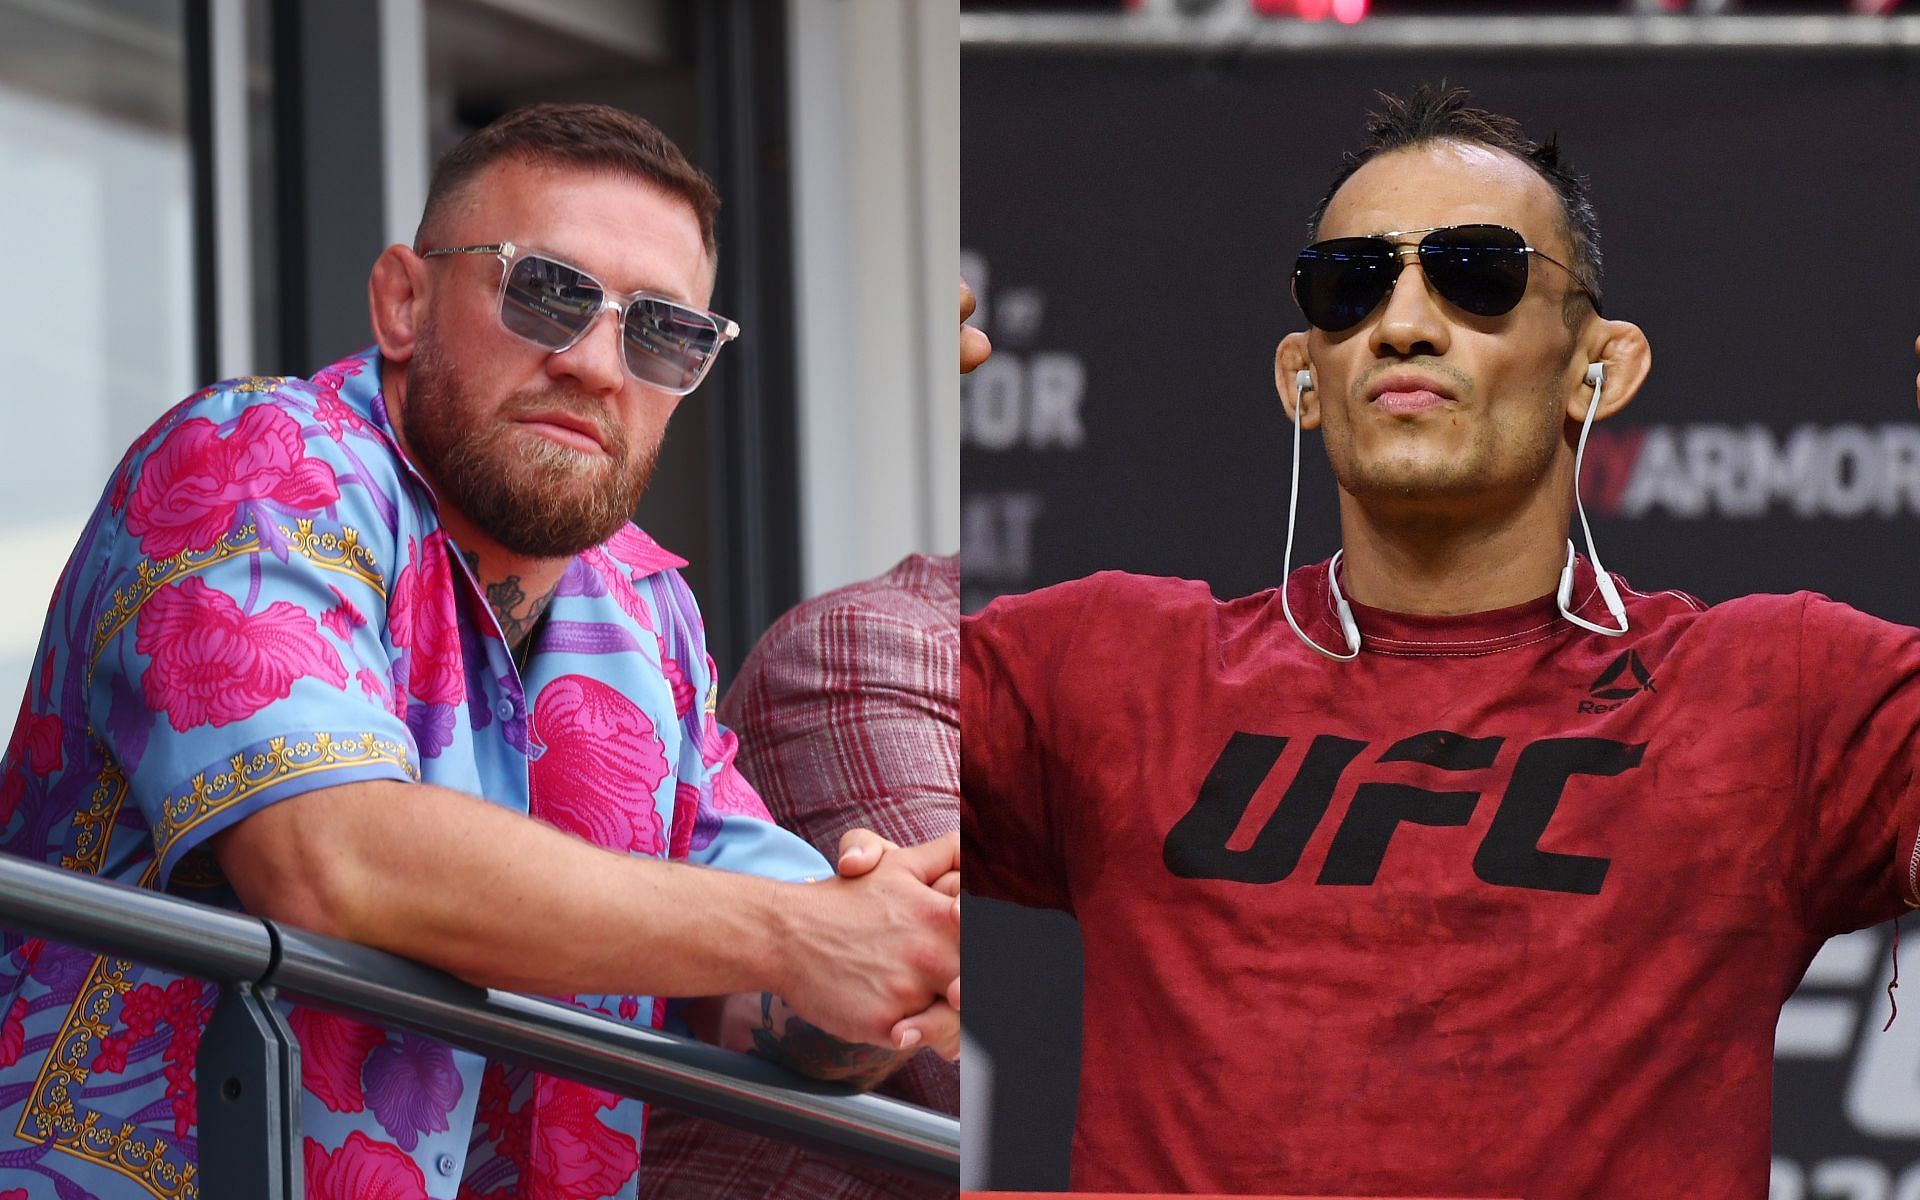 Conor McGregor (left) and Tony Ferguson (right) (Images via Getty)